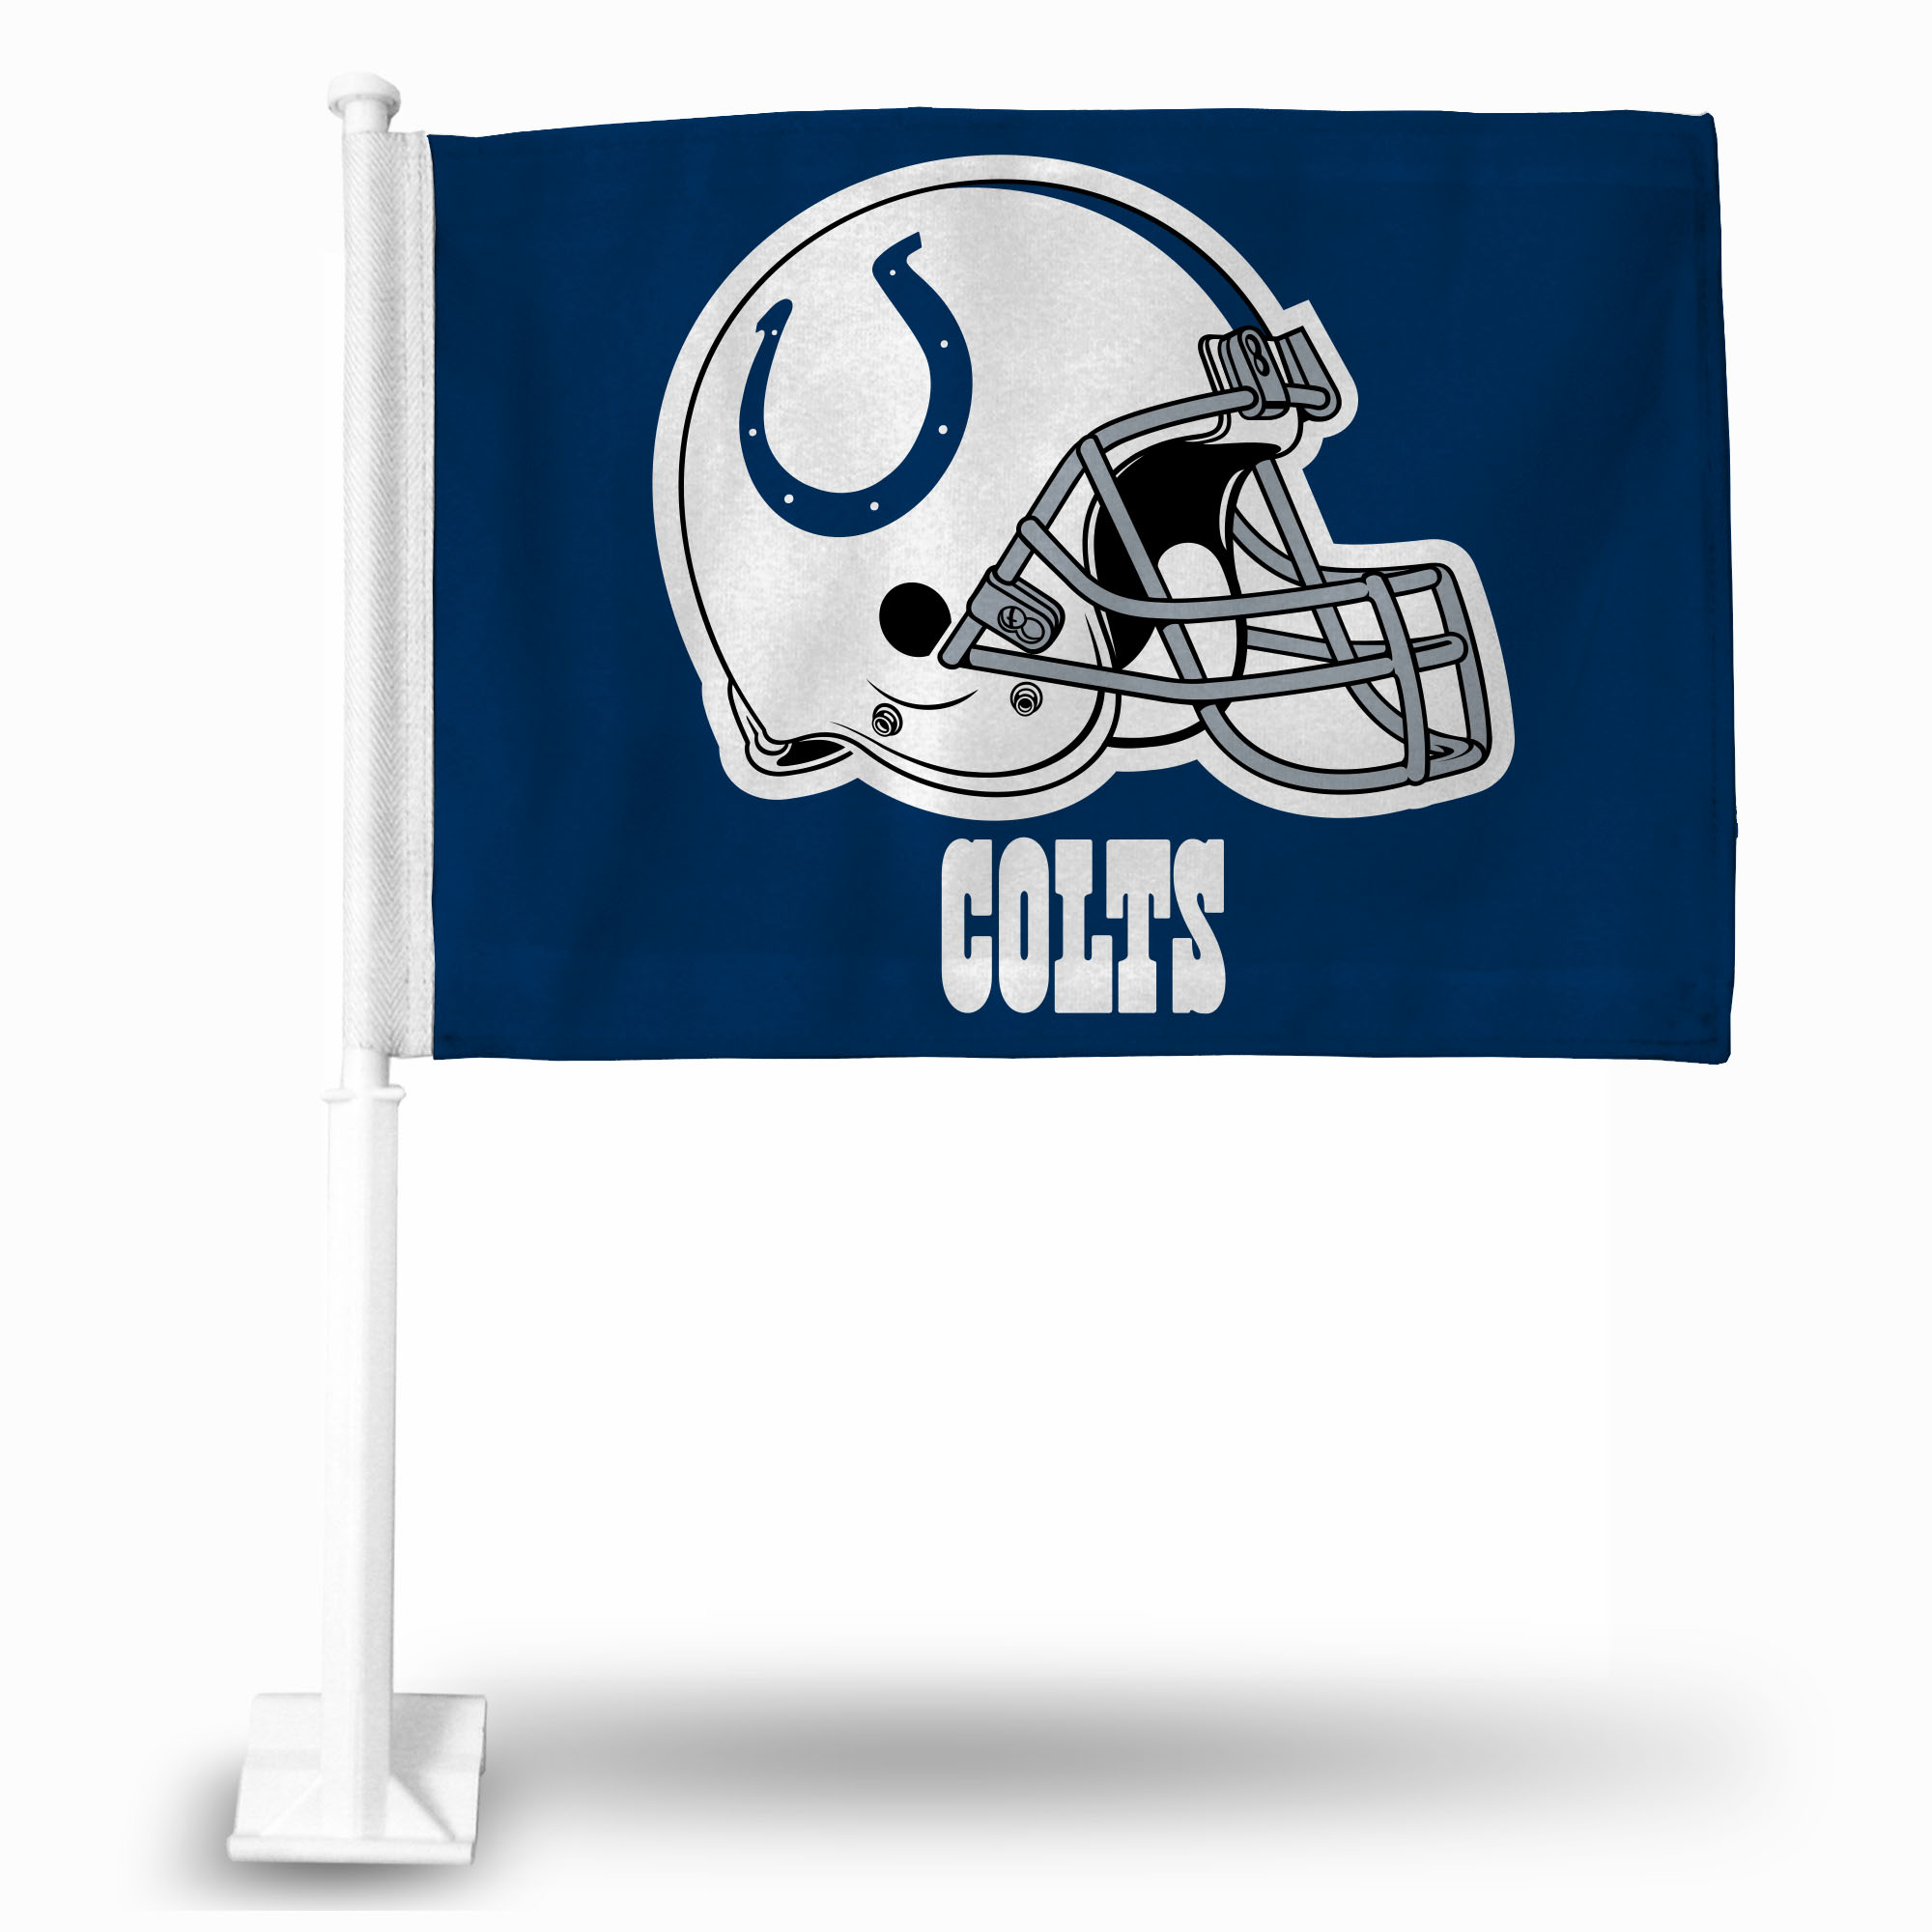 Indianapolis NFL Colts 11X14 Window Mount 2-Sided Car Flag - image 1 of 5